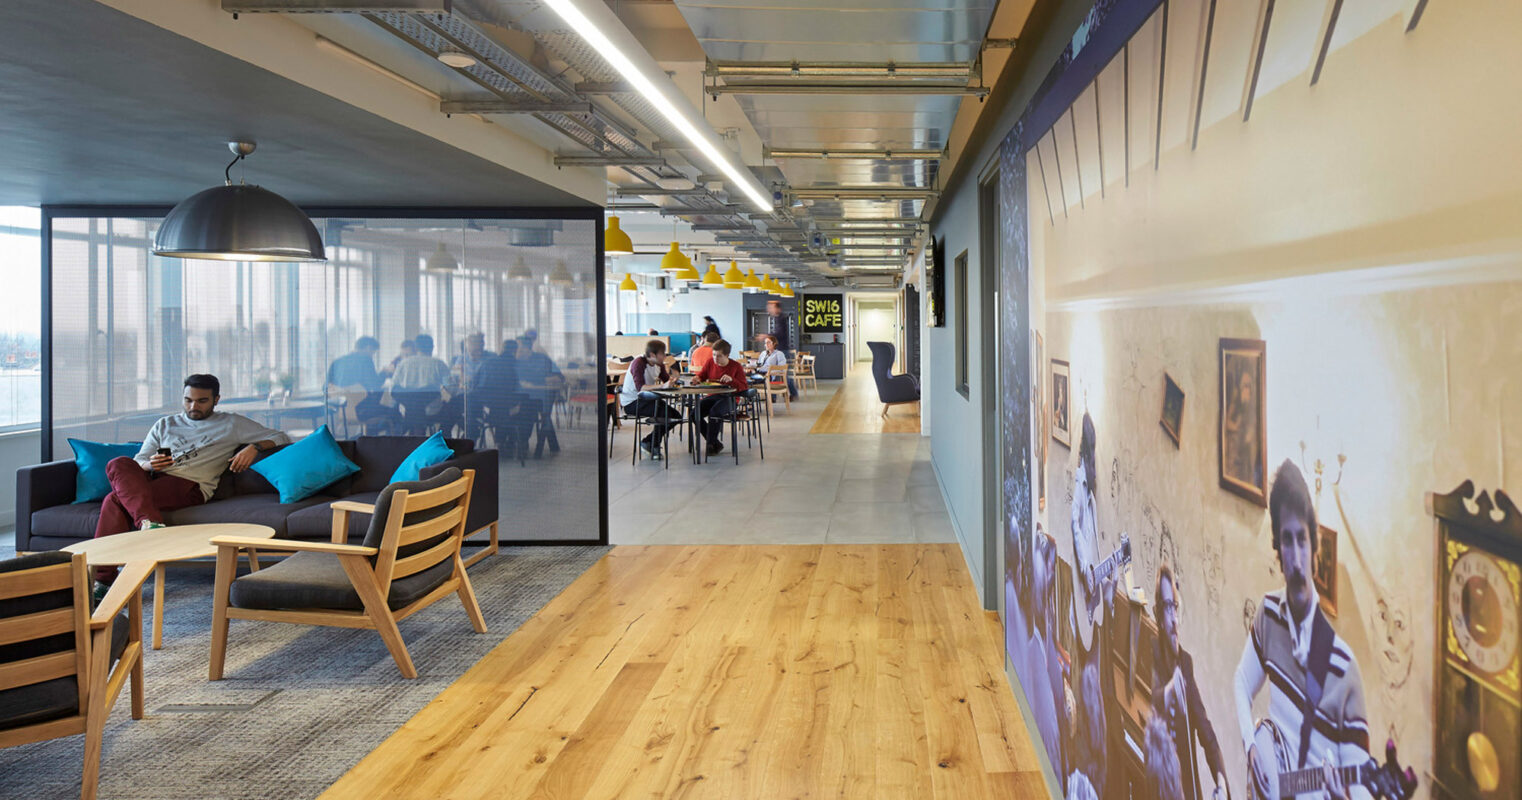 Modern office interior showcasing an open-plan layout with natural wood floors. Employees engage in collaborative work at colorful tables under yellow pendant lights. To the right, a casual seating area with a grey sofa provides a relaxed space beside a large historical mural.